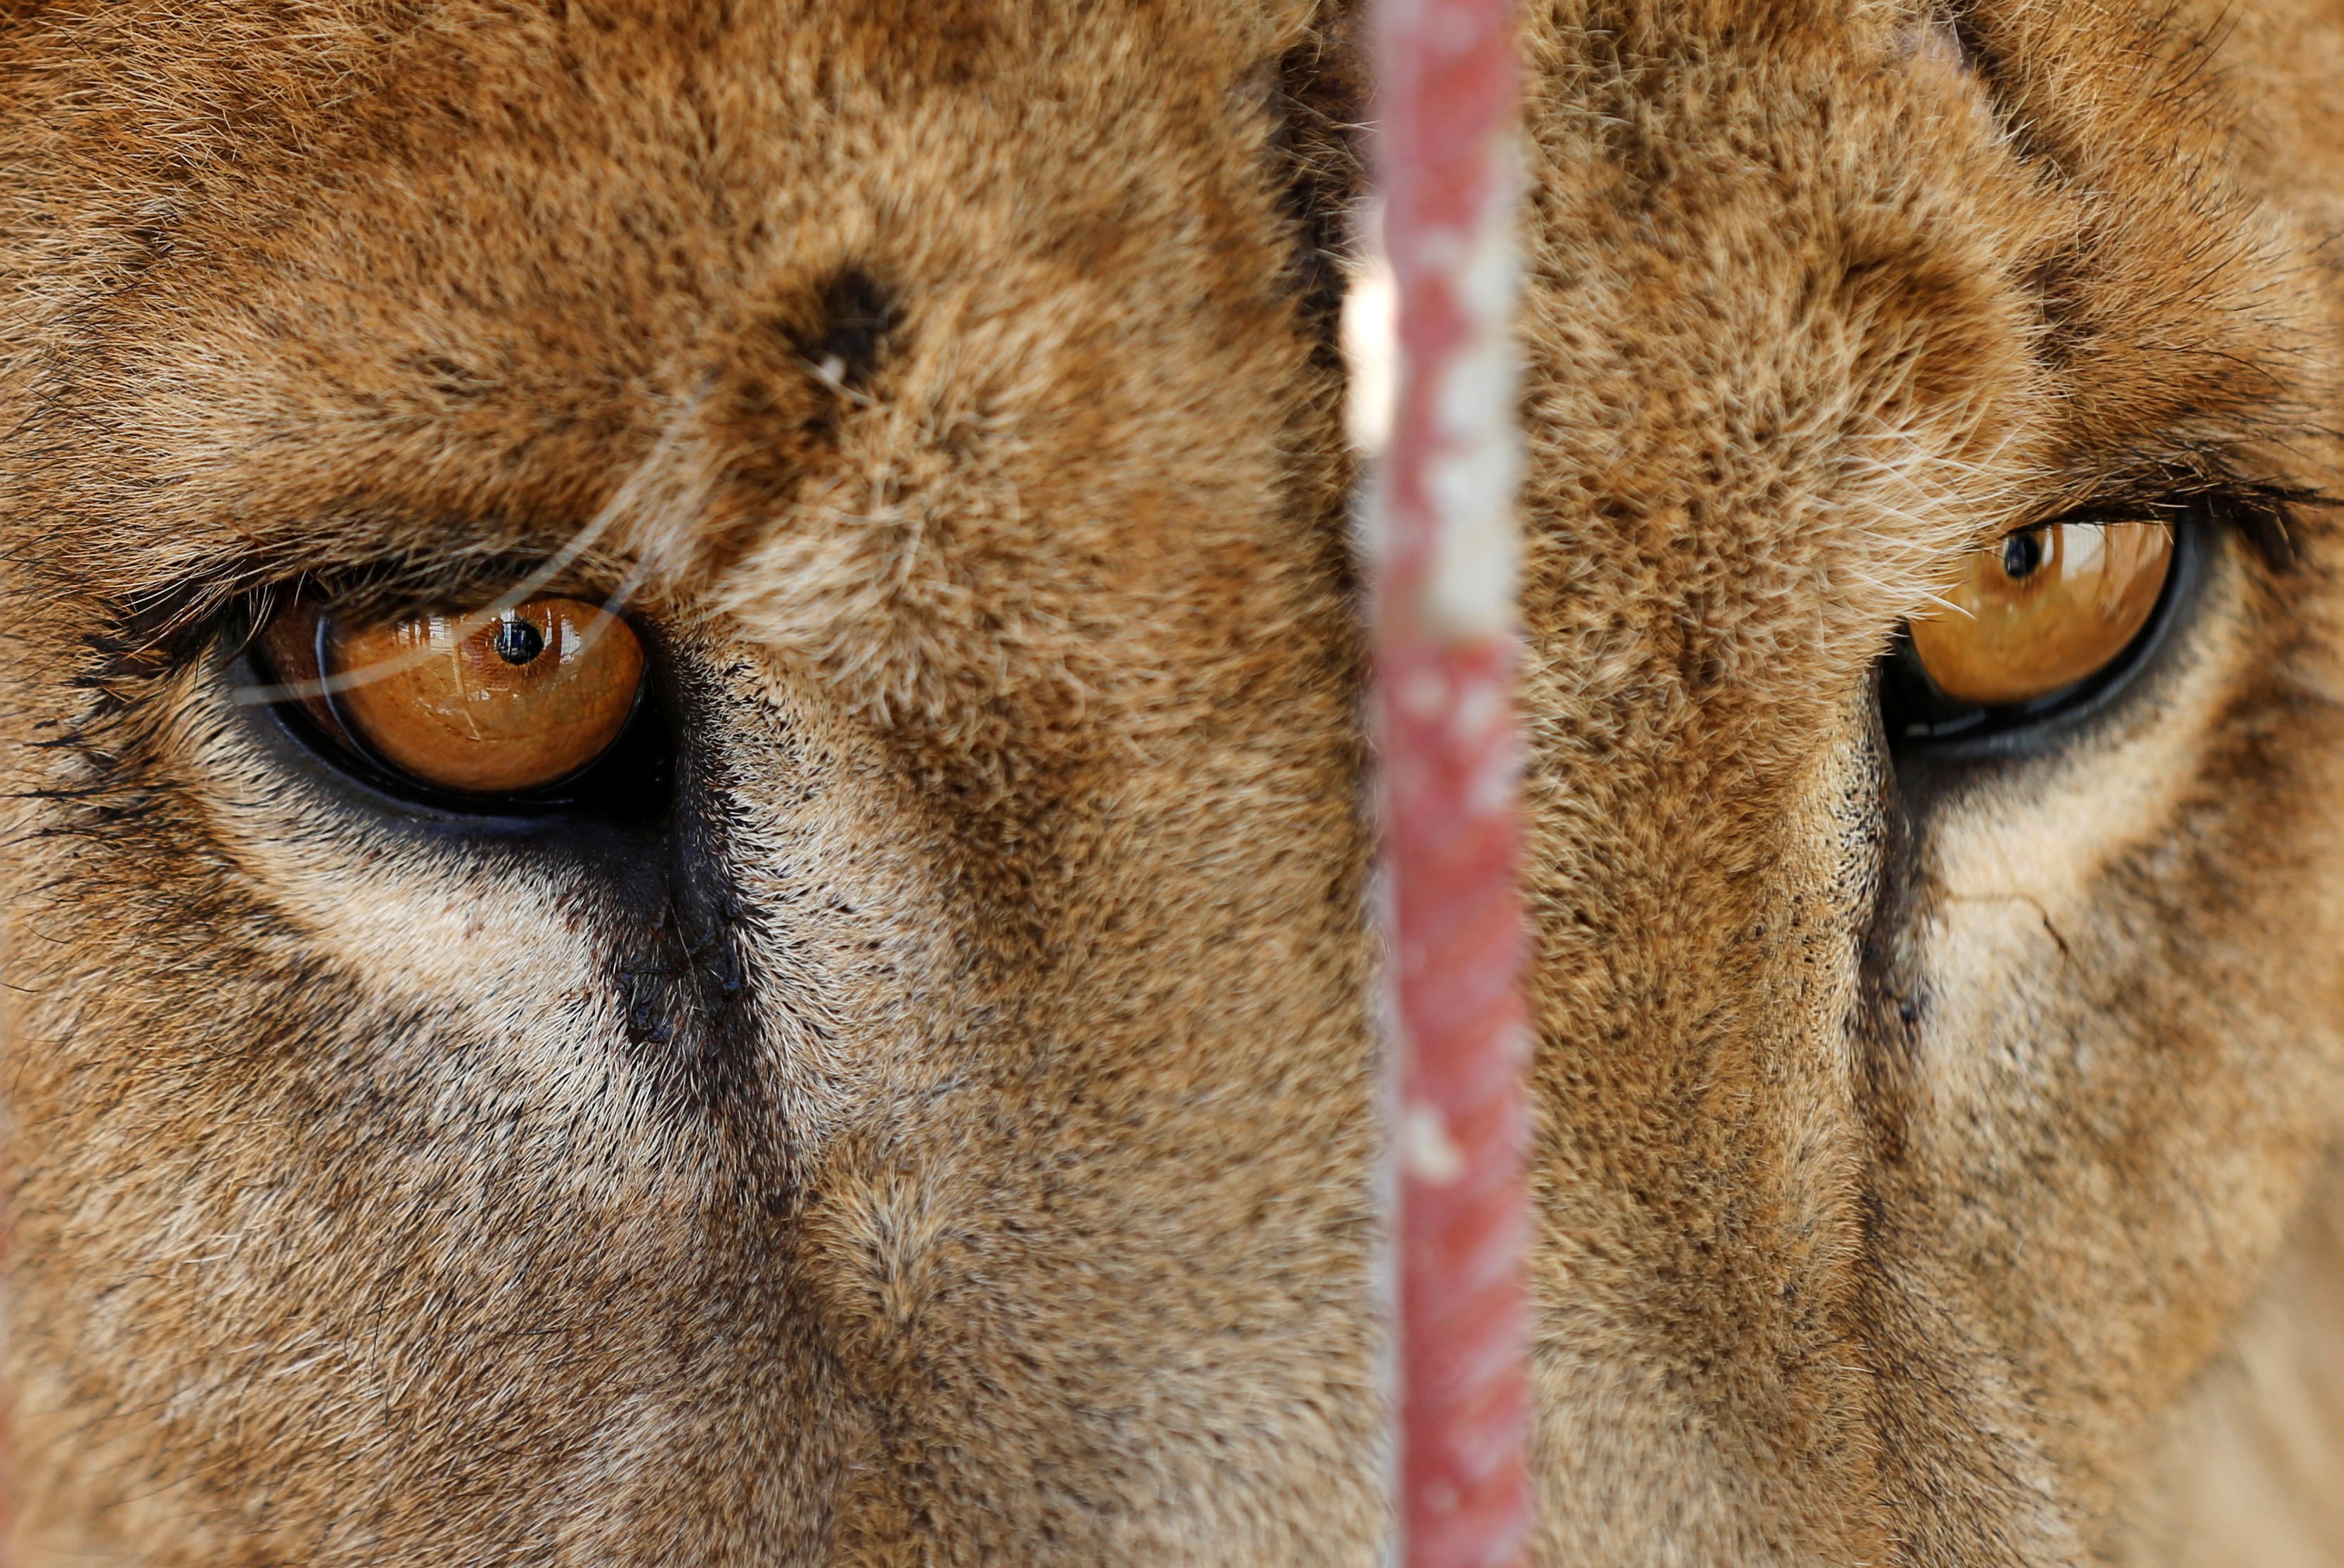 A starving lion is seen in its cage at Mosul's zoo, Iraq, February 2, 2017. REUTERS/Muhammad Hamed